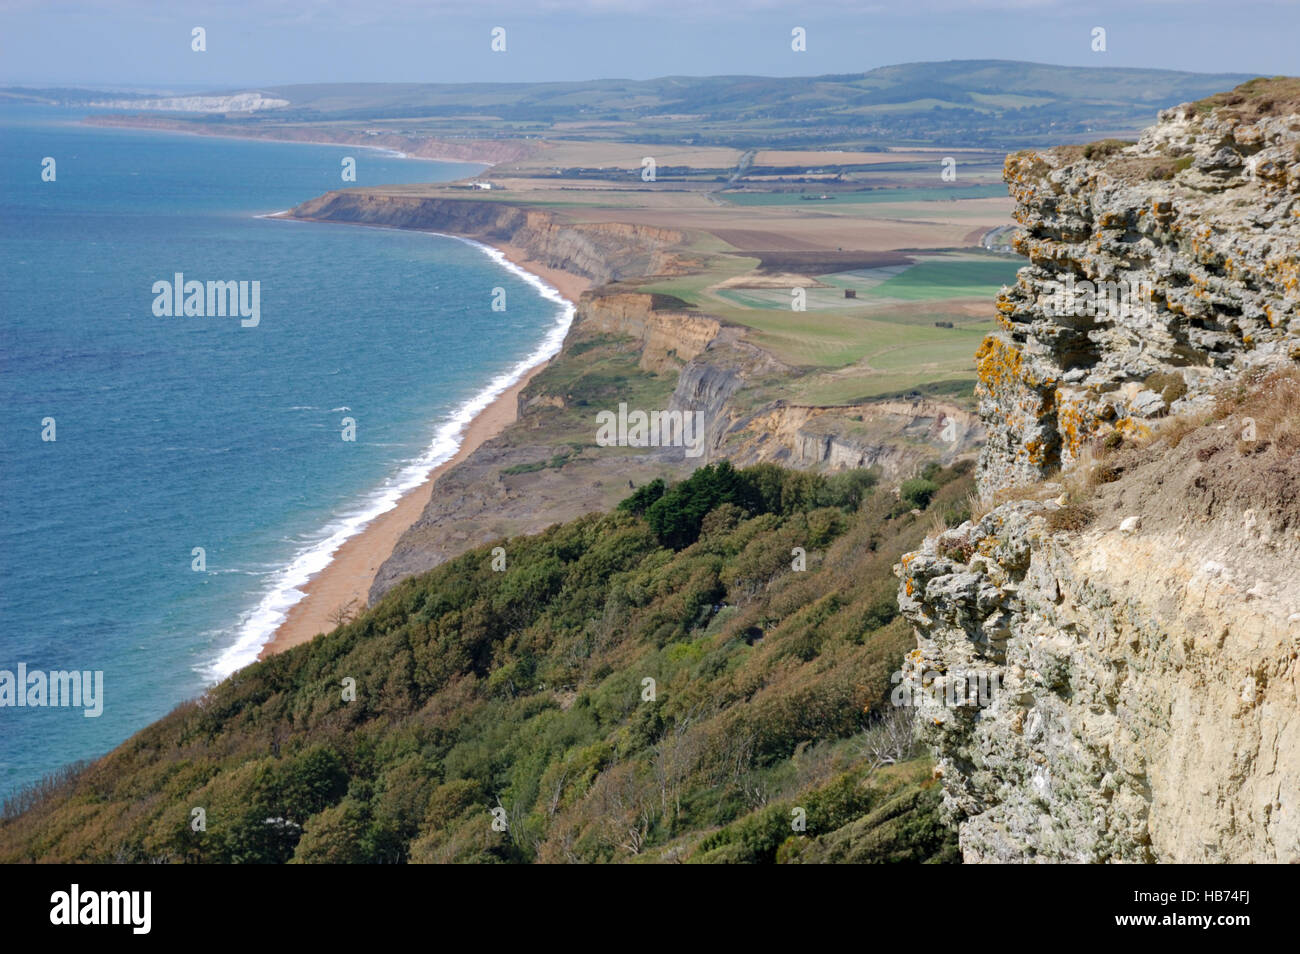 Looking over the landslip at Blackgang Chine and Whale Chine on Chale Bay, Isle of Wight Stock Photo